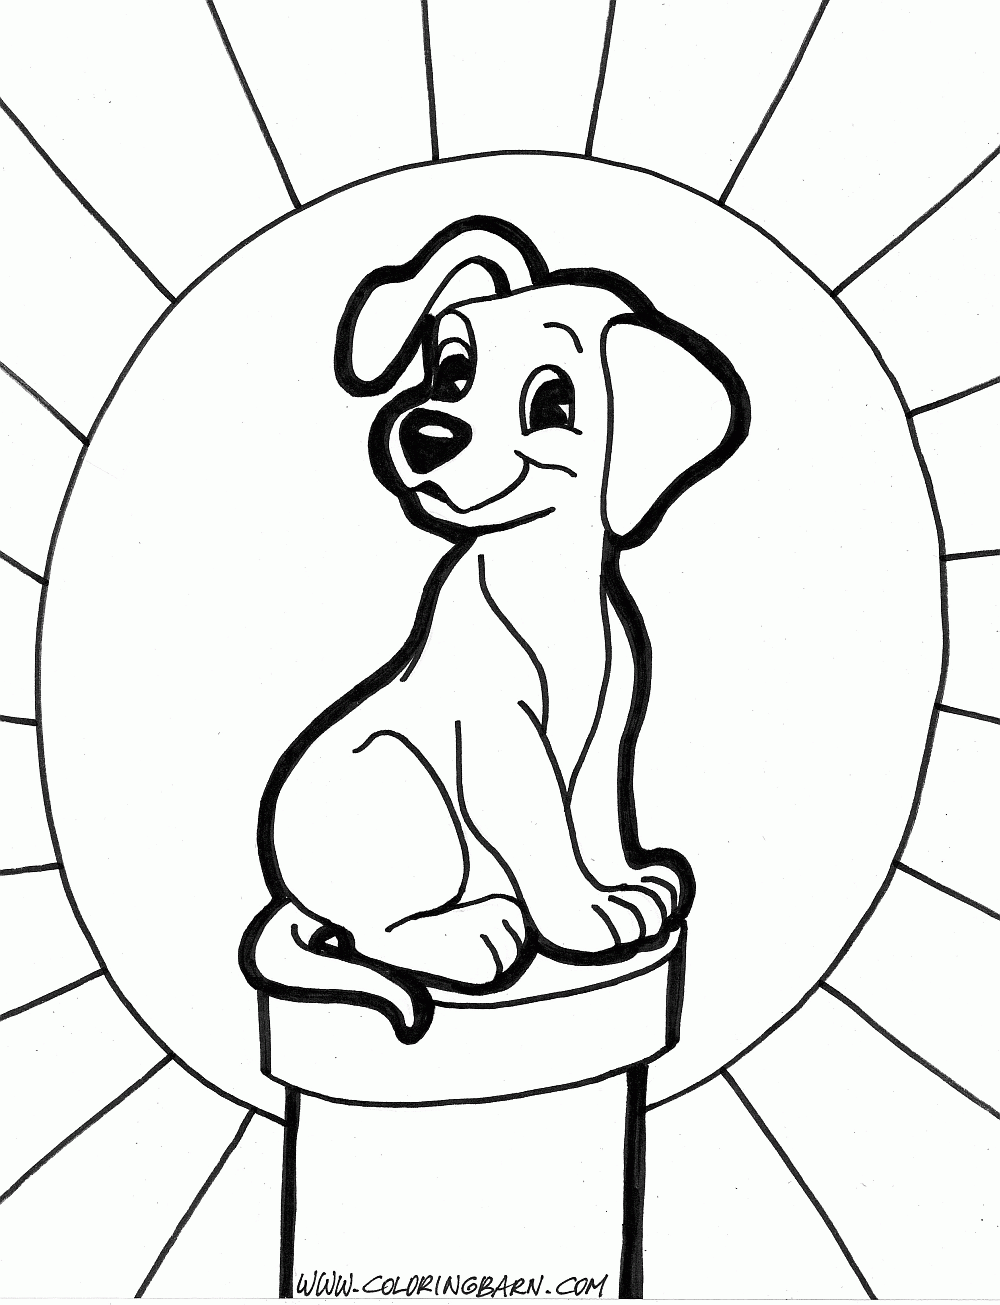 Little Puppy Coloring Pages - Coloring Home